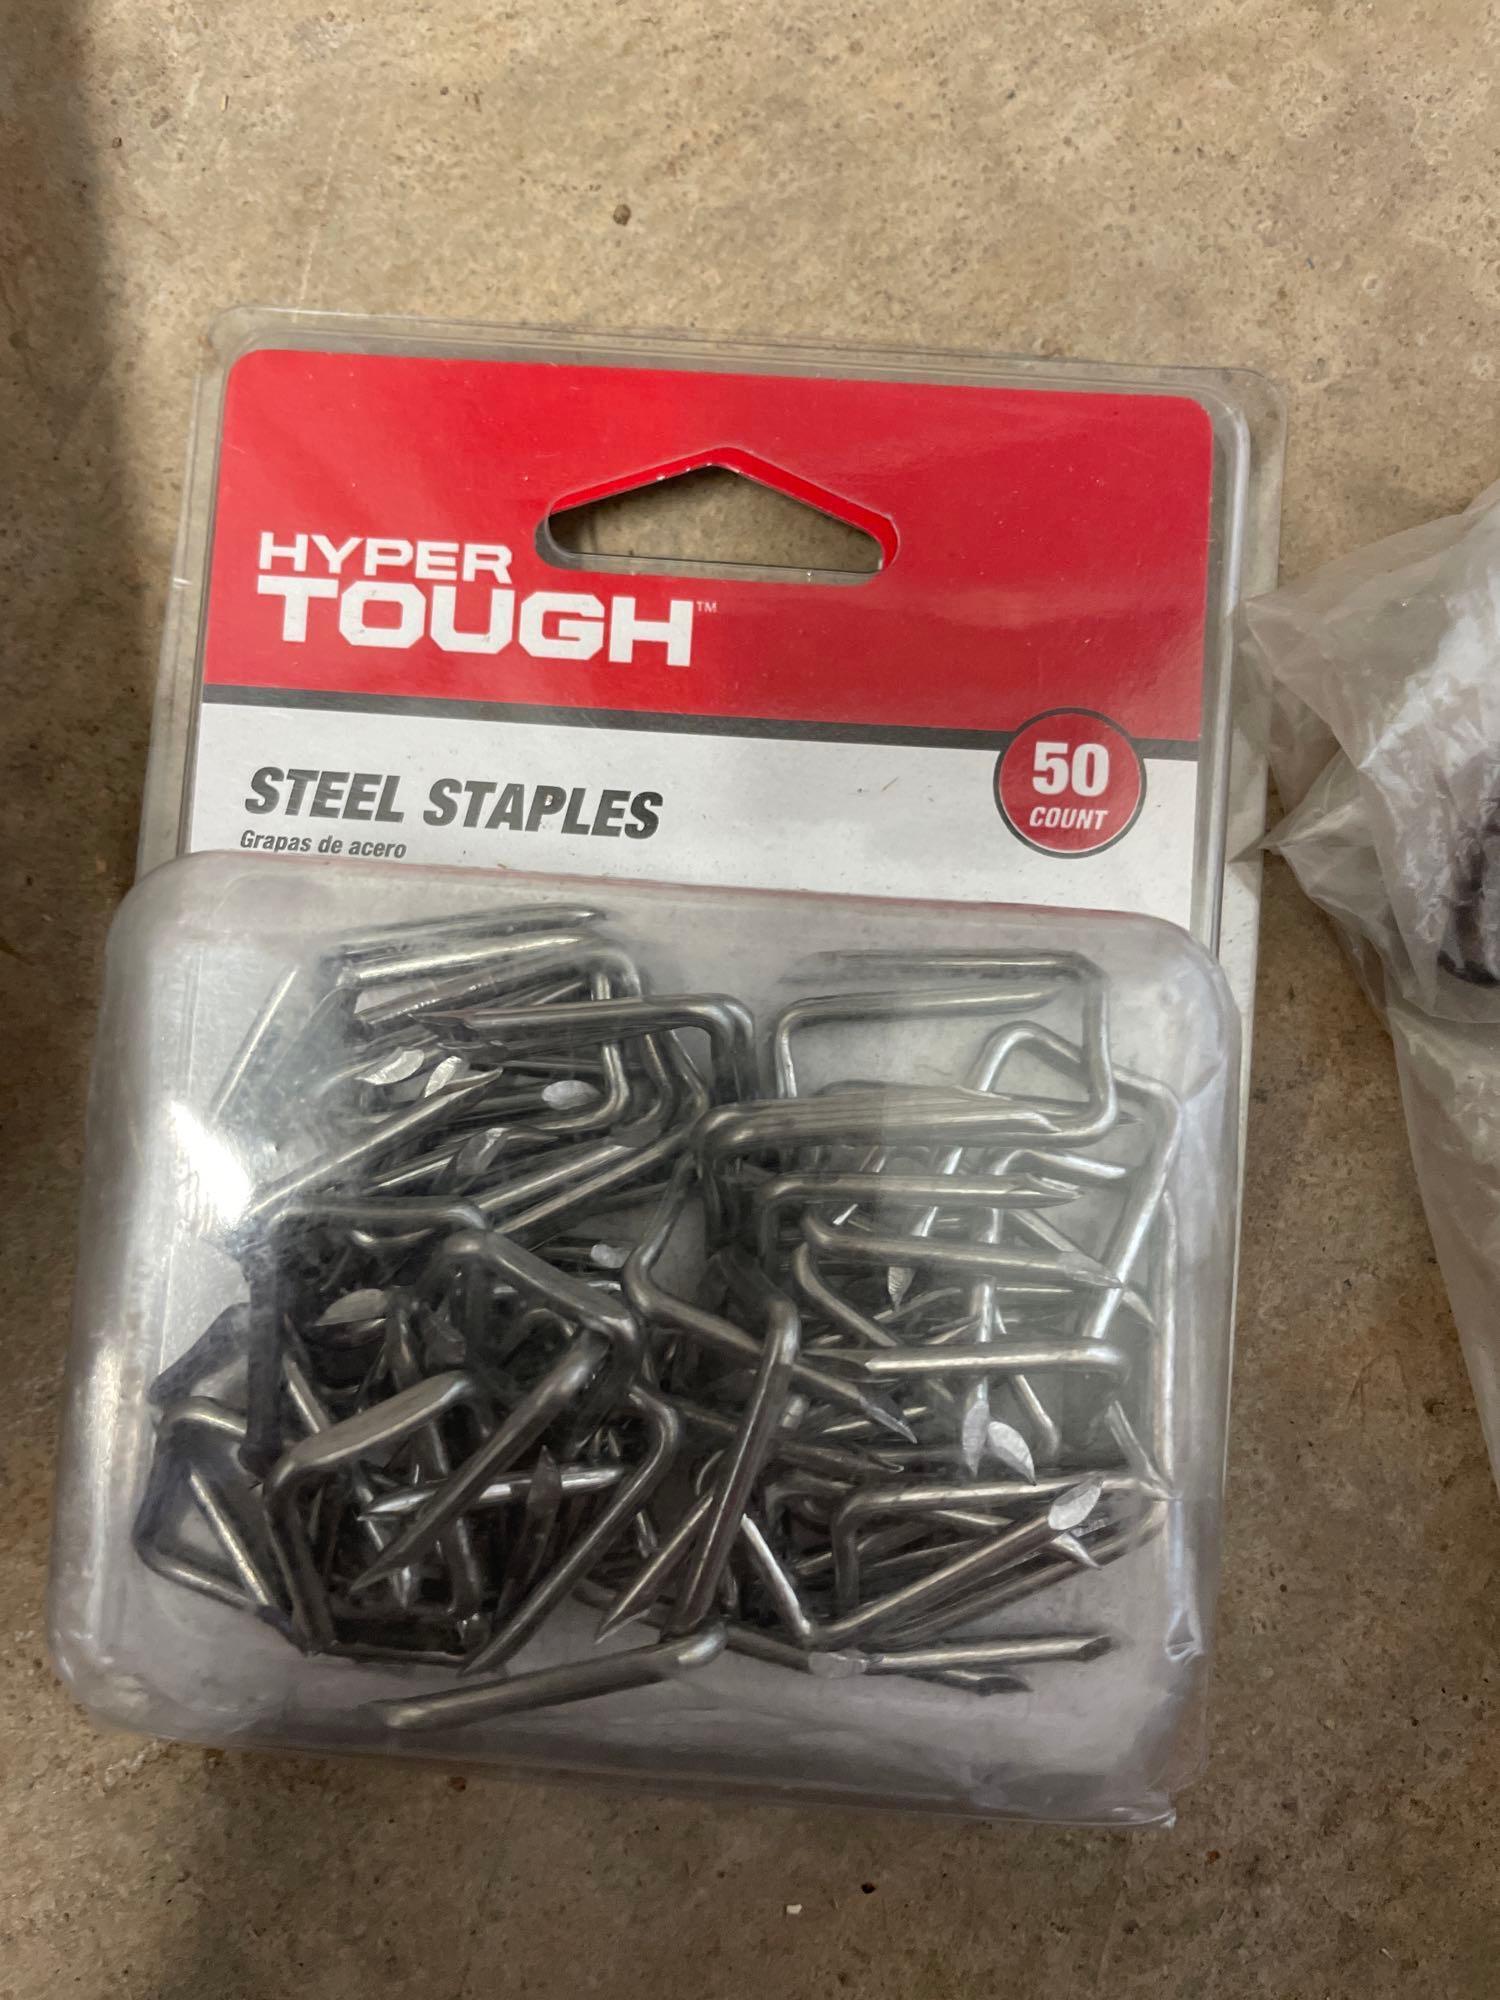 staples/ fence clips